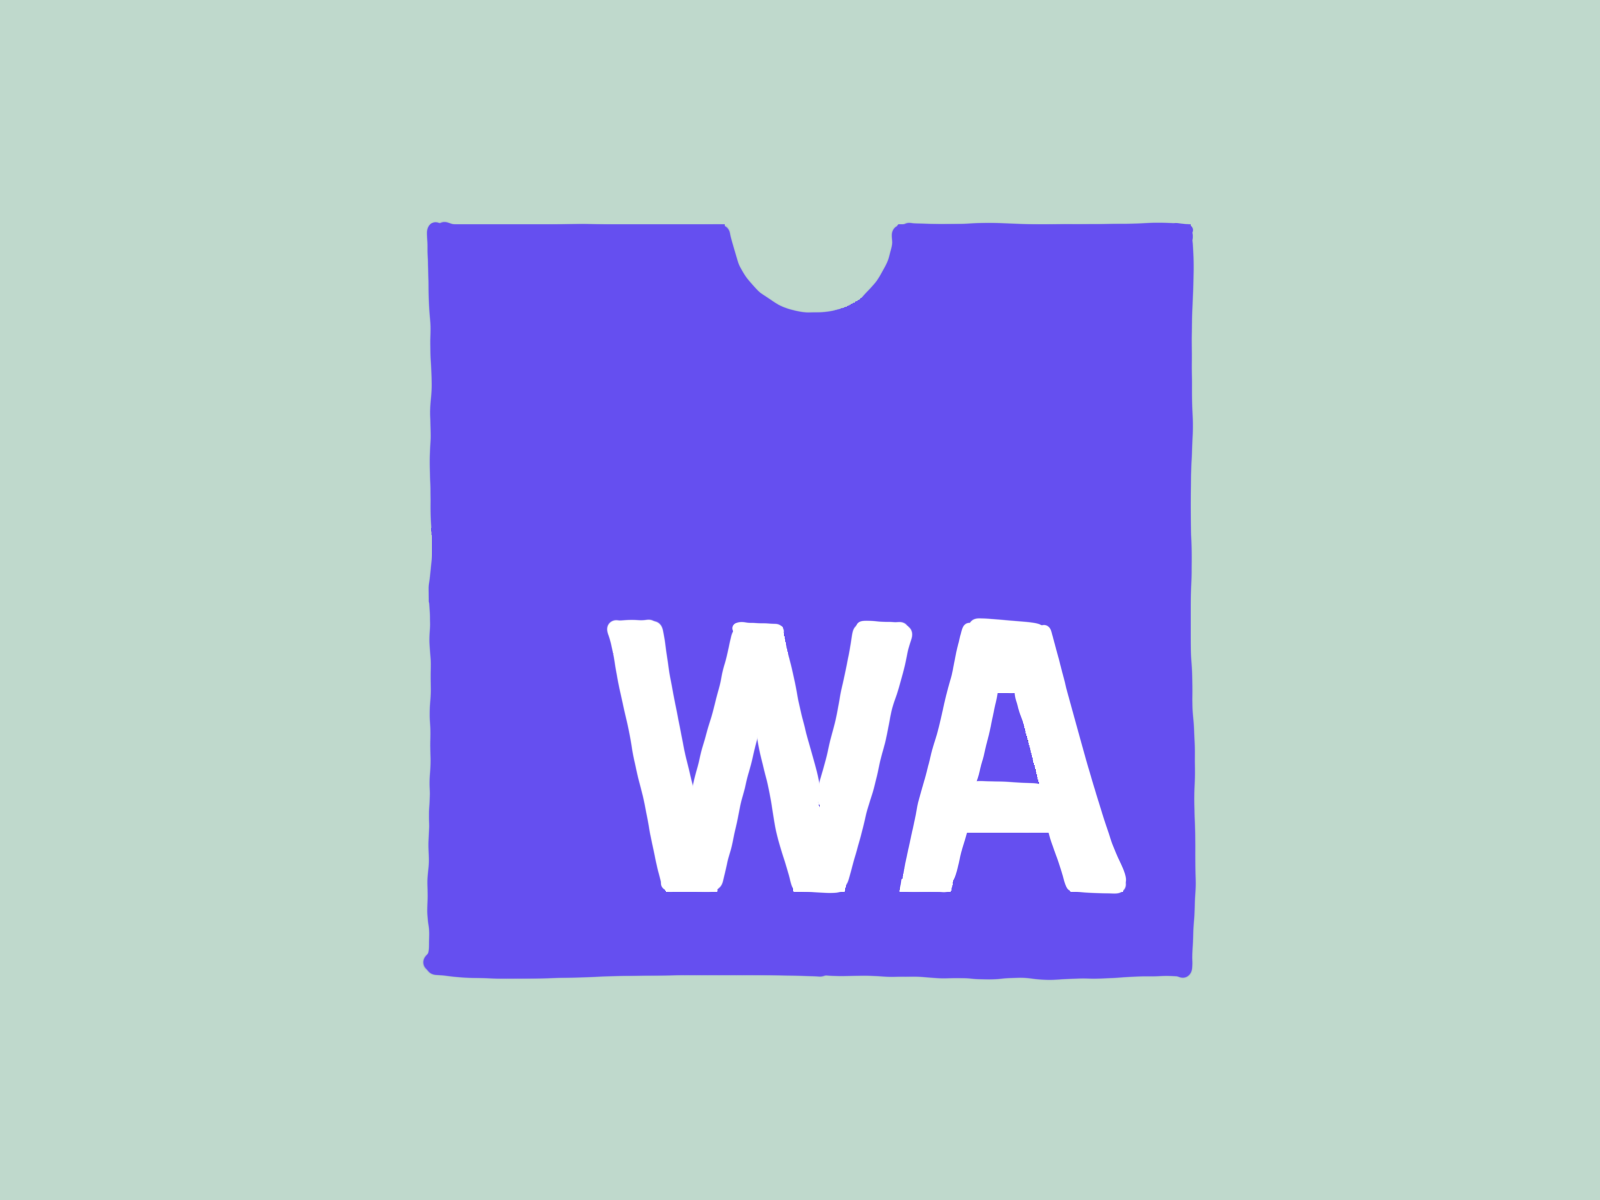 An illustration of the WebAssembly logo.